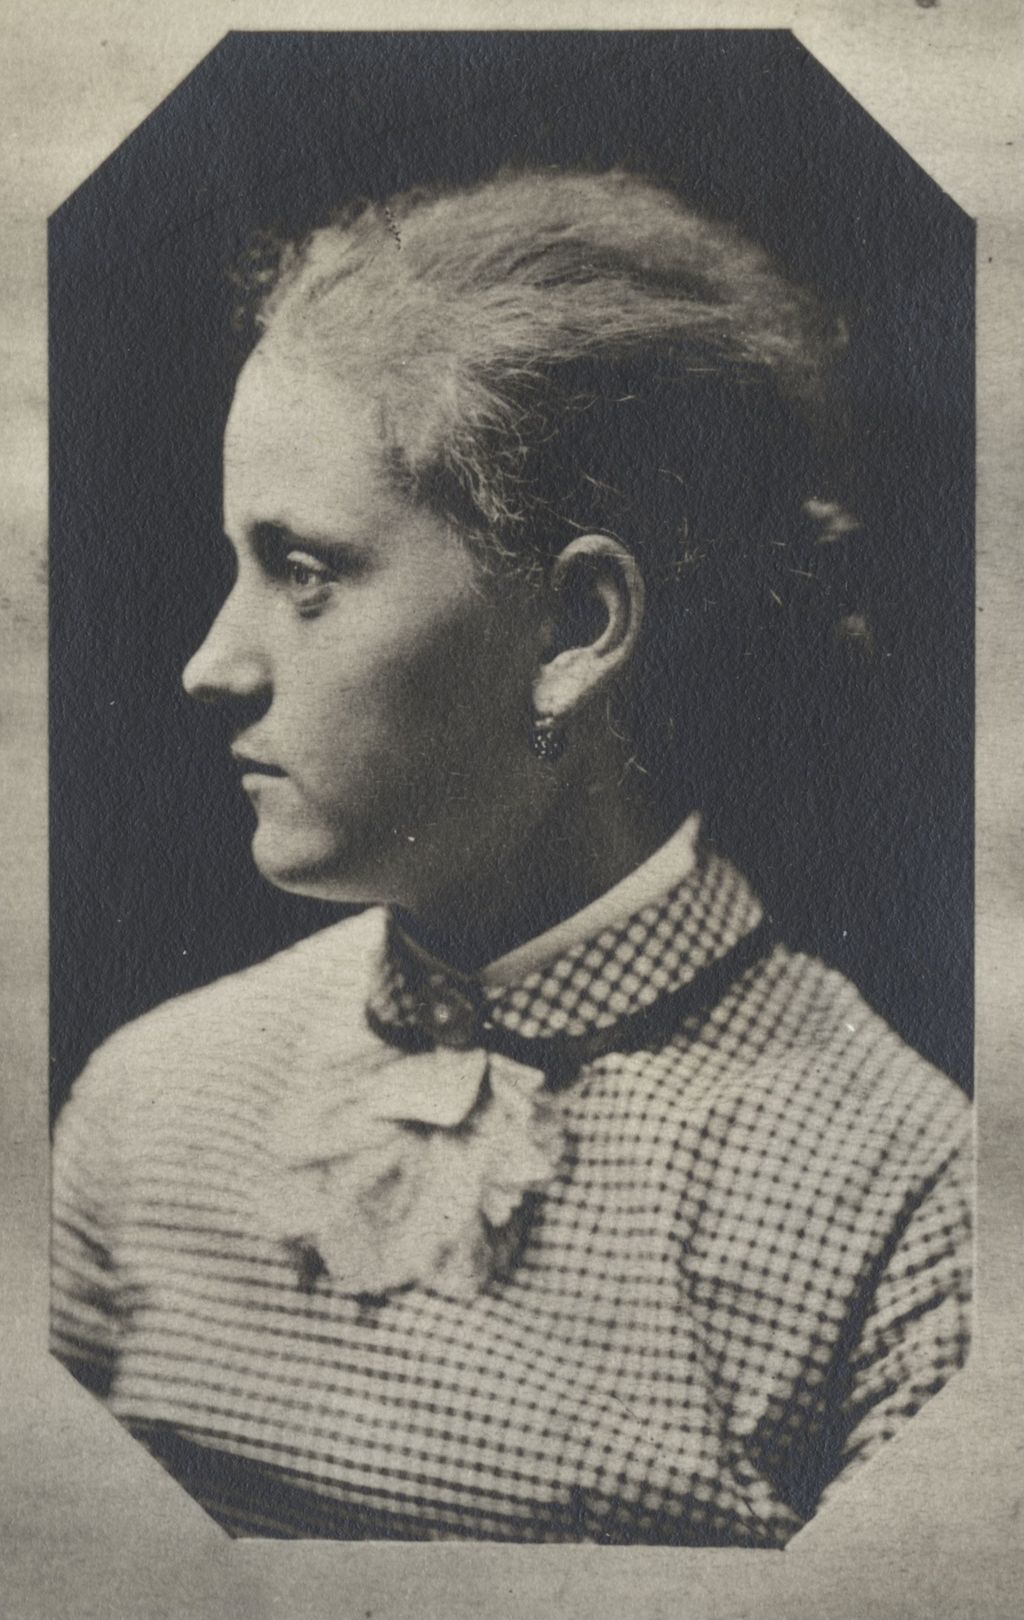 Portrait of a young Jane Addams at age 16